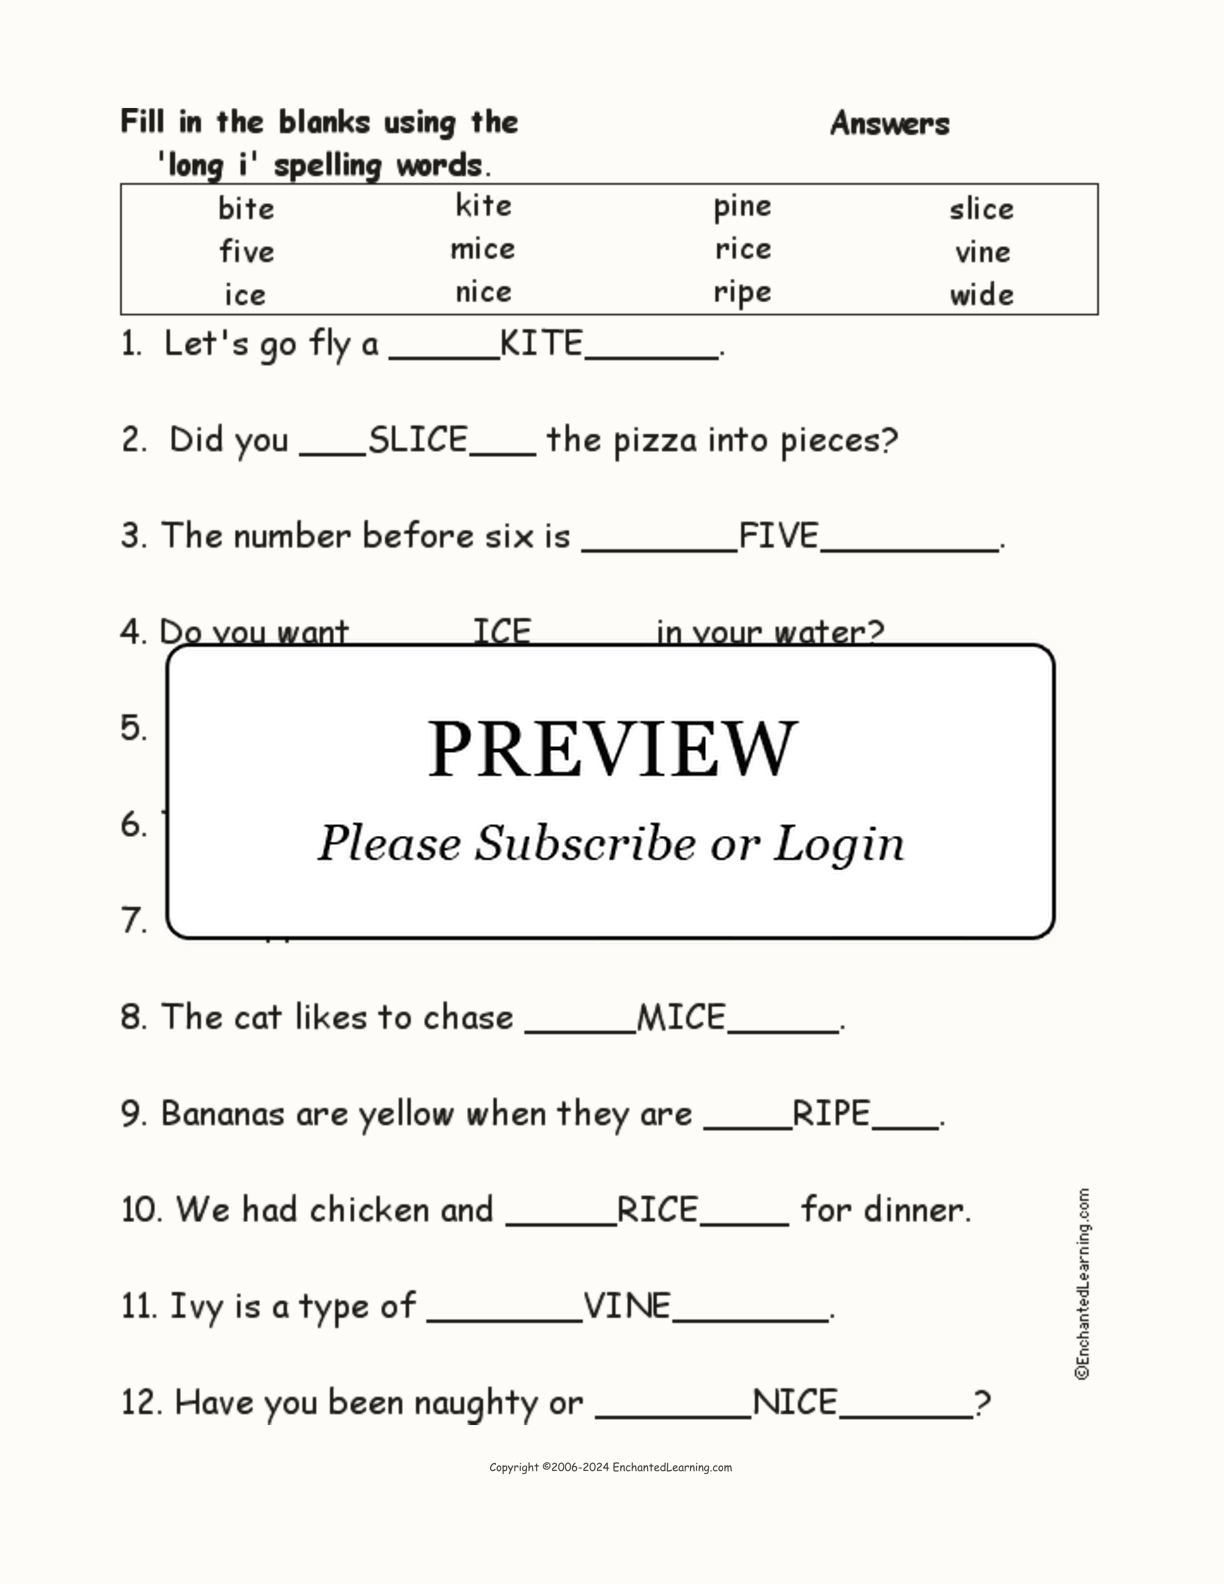 Long I: Spelling Word Questions interactive worksheet page 2